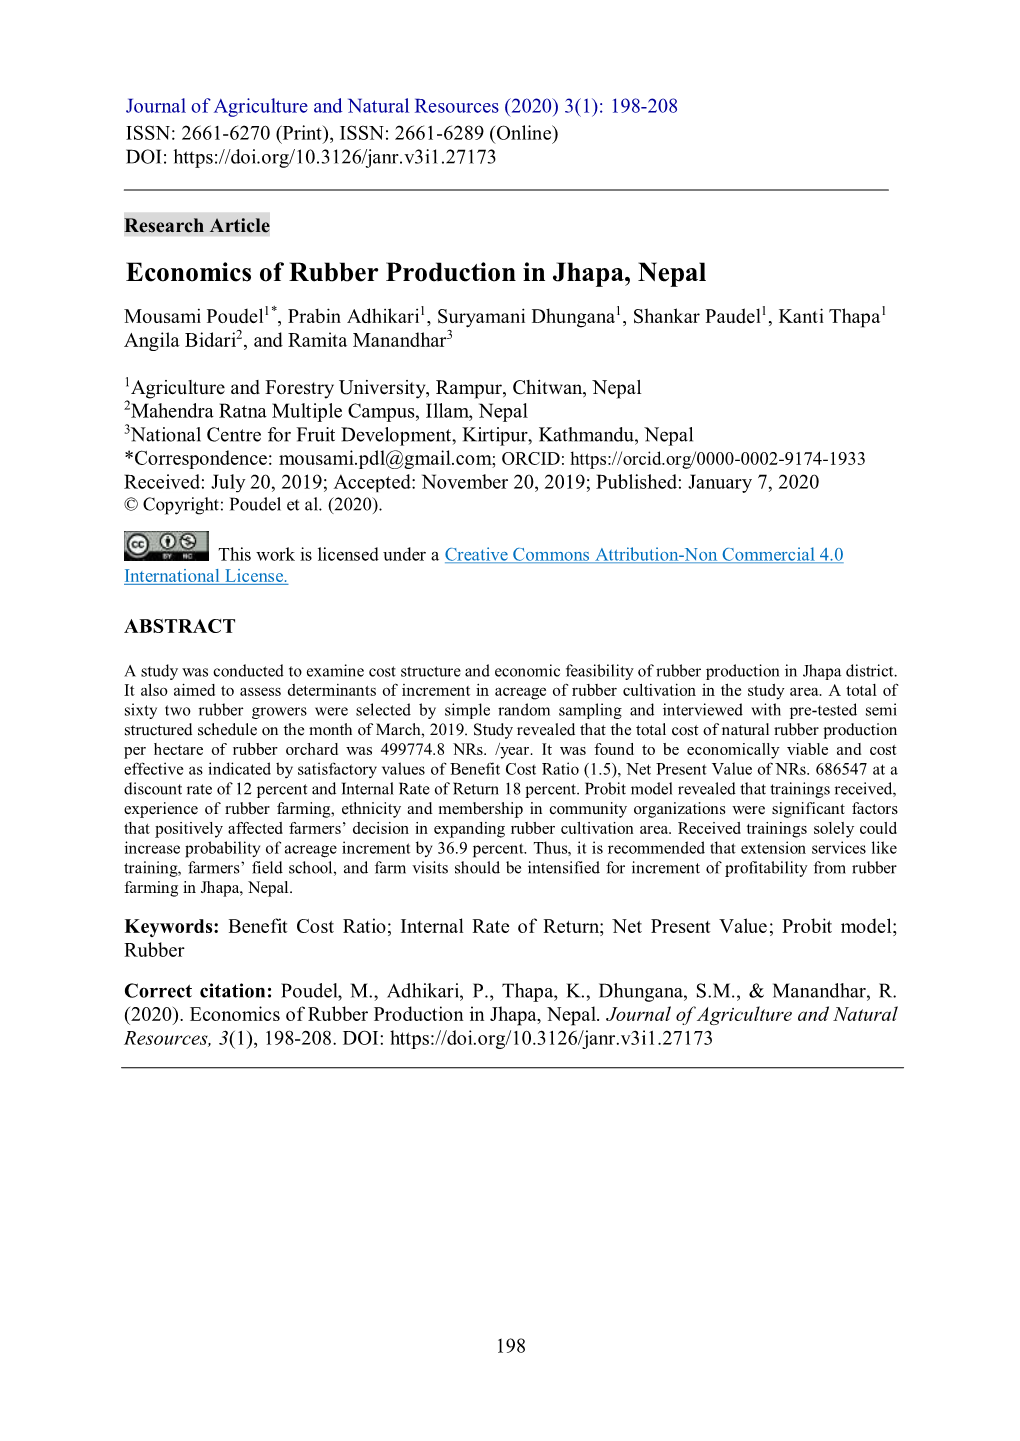 Economics of Rubber Production in Jhapa, Nepal